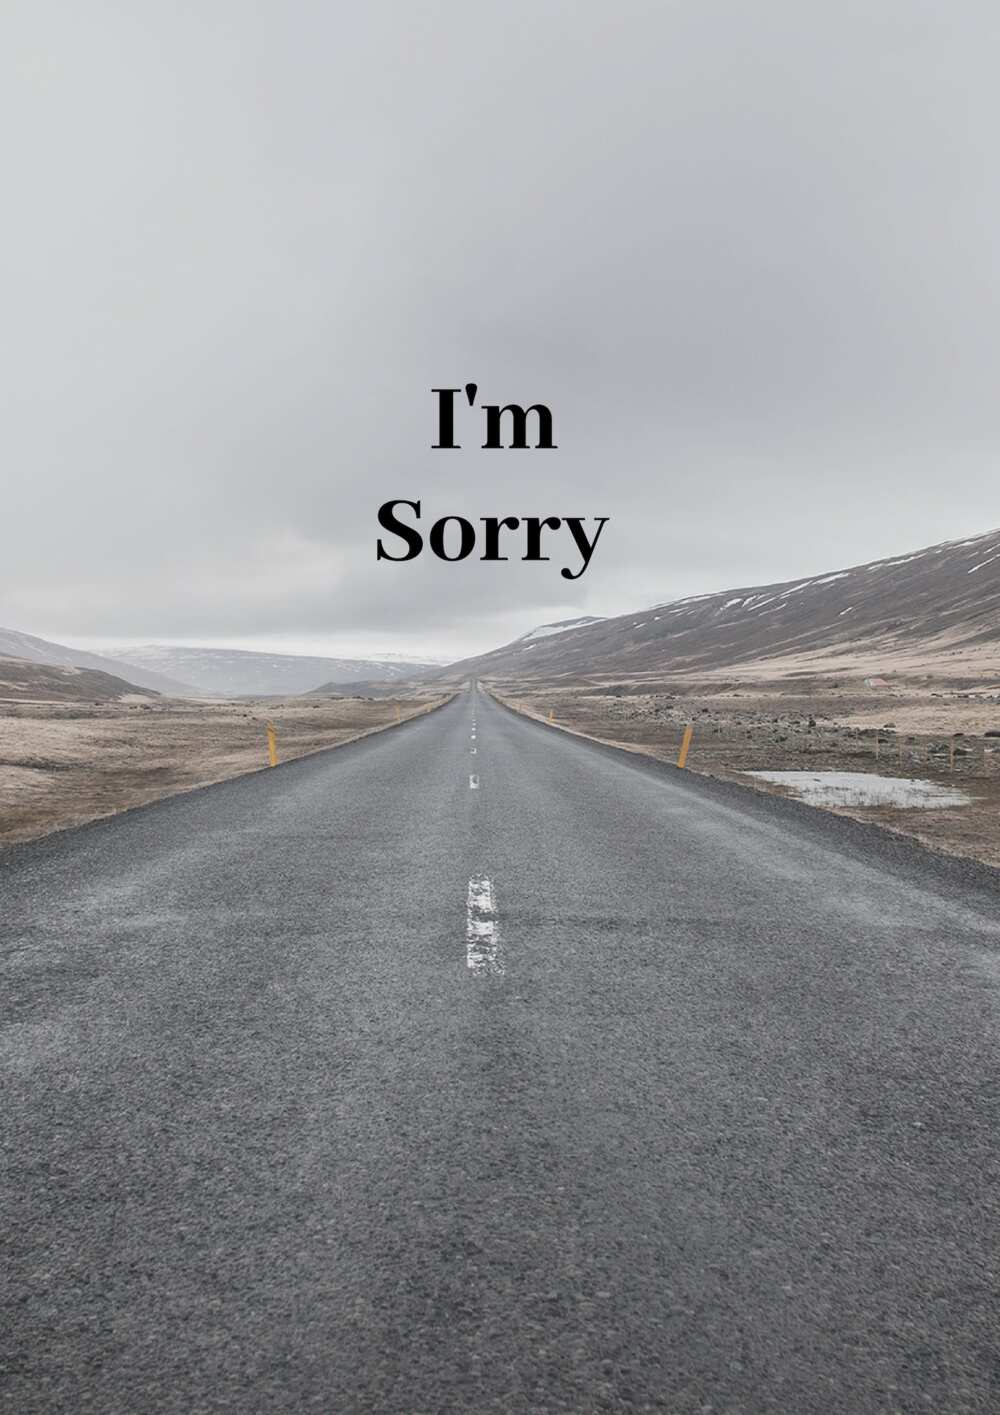 Sorry quotes, sorry quotes for love